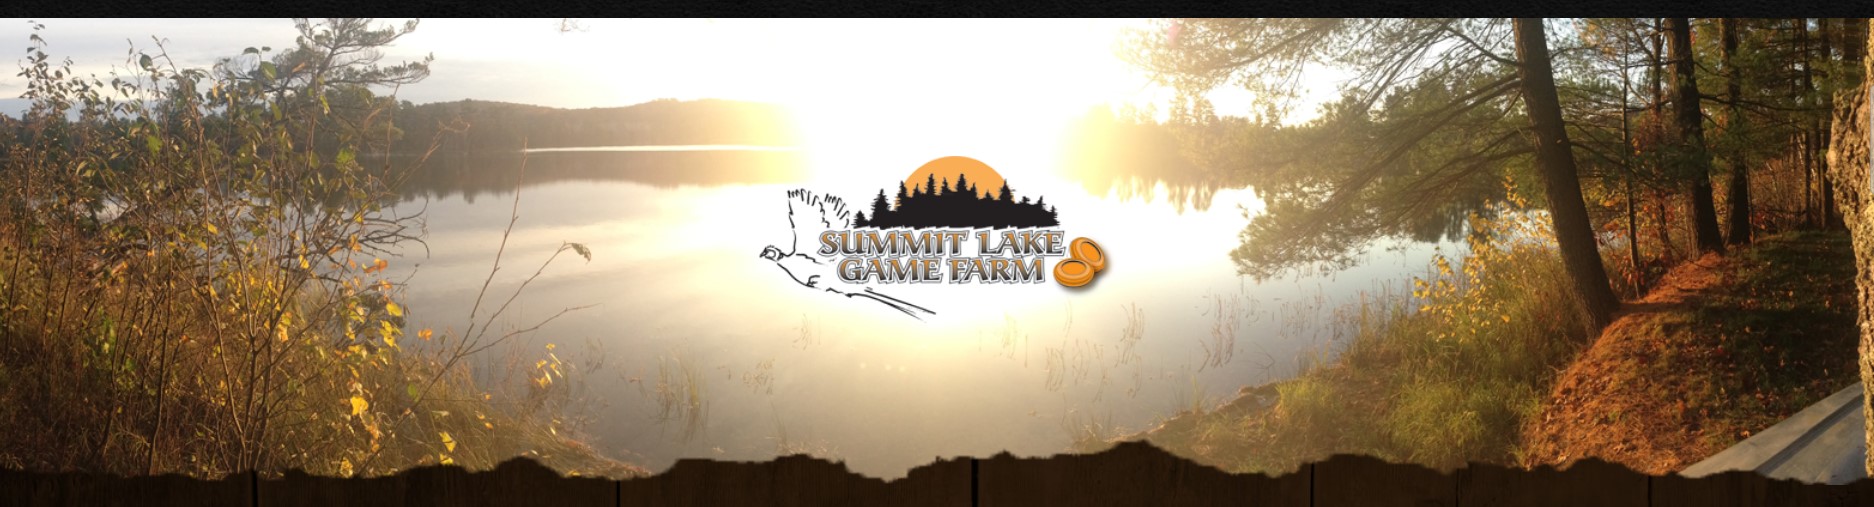 Grouse Camp in Stone Lake, WI - October 7th-10th 2021 @ Summit Lake Game Farm